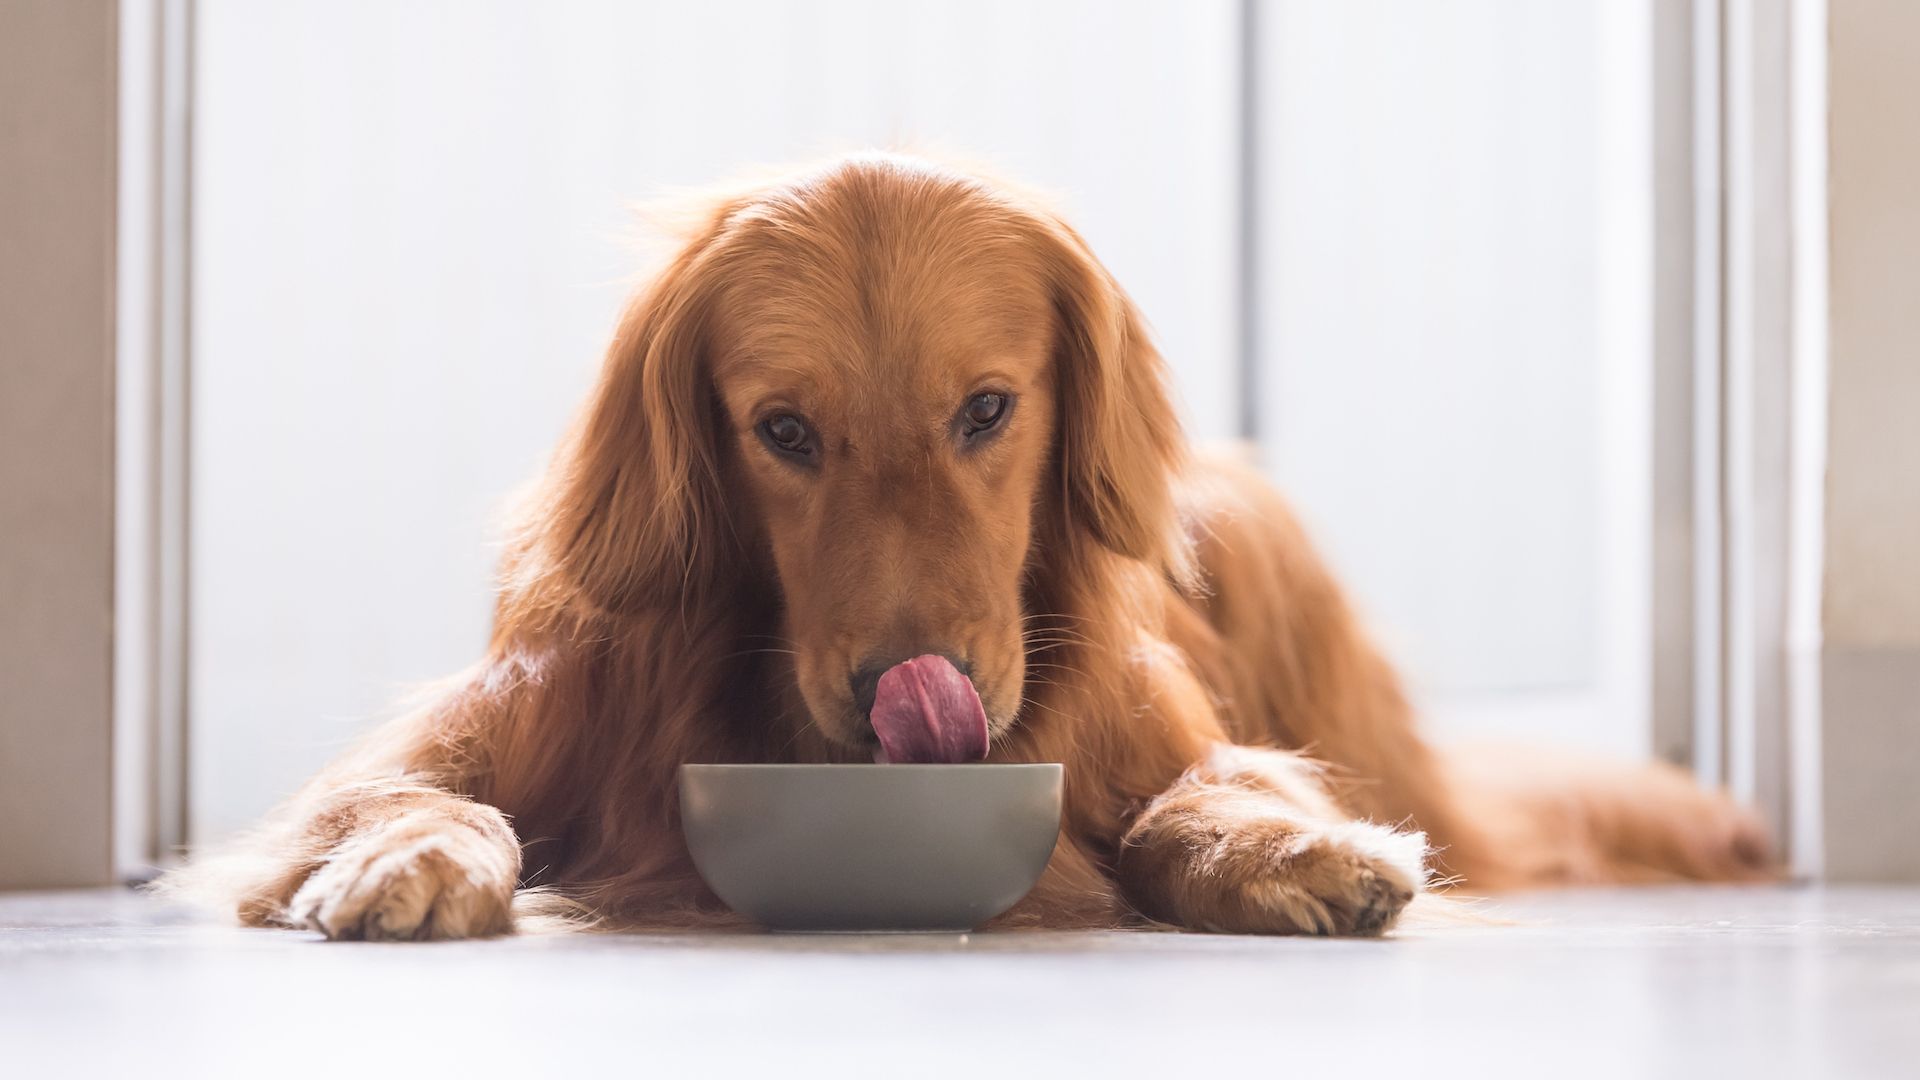 <p>                     Dogs might not quite rack up the weekly shopping bill that humans do at the grocery store, but the cost of high-quality dog food is significant. The more nutritious the food, typically the higher the price. Especially galling when you’re having to pick up what comes out the other end...                   </p>